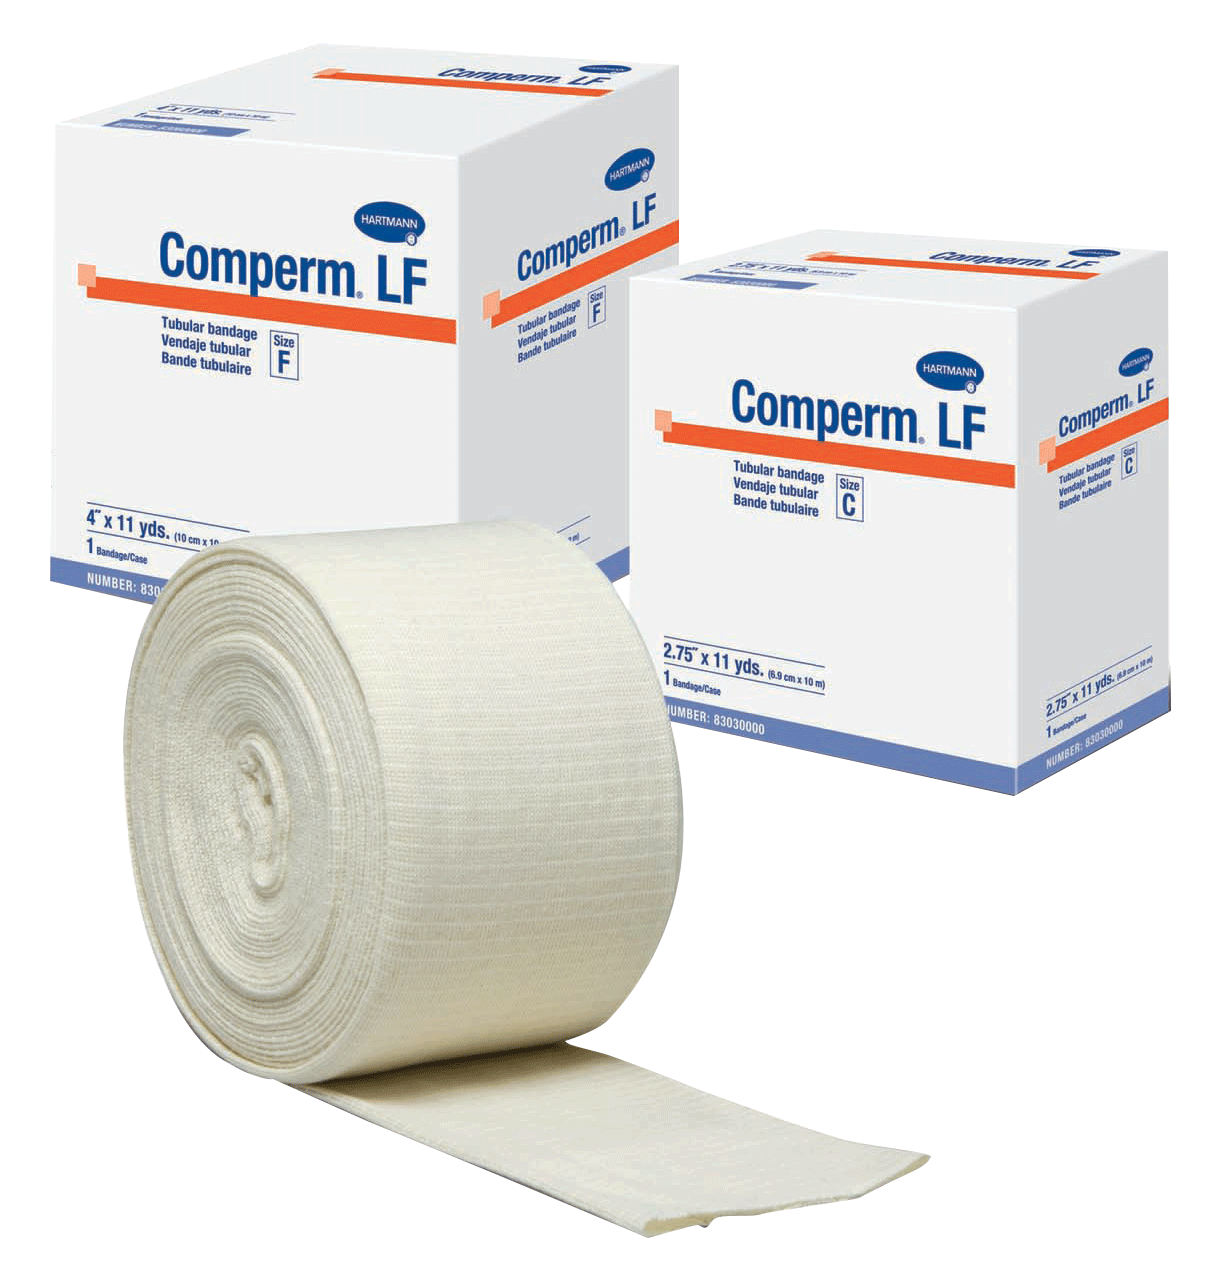 BX/1 - Hartmann Comperm&reg; Tubular Bandage, Size F, Latex-Free, for Large Knees or Thighs, 4" x 11 yds - Best Buy Medical Supplies